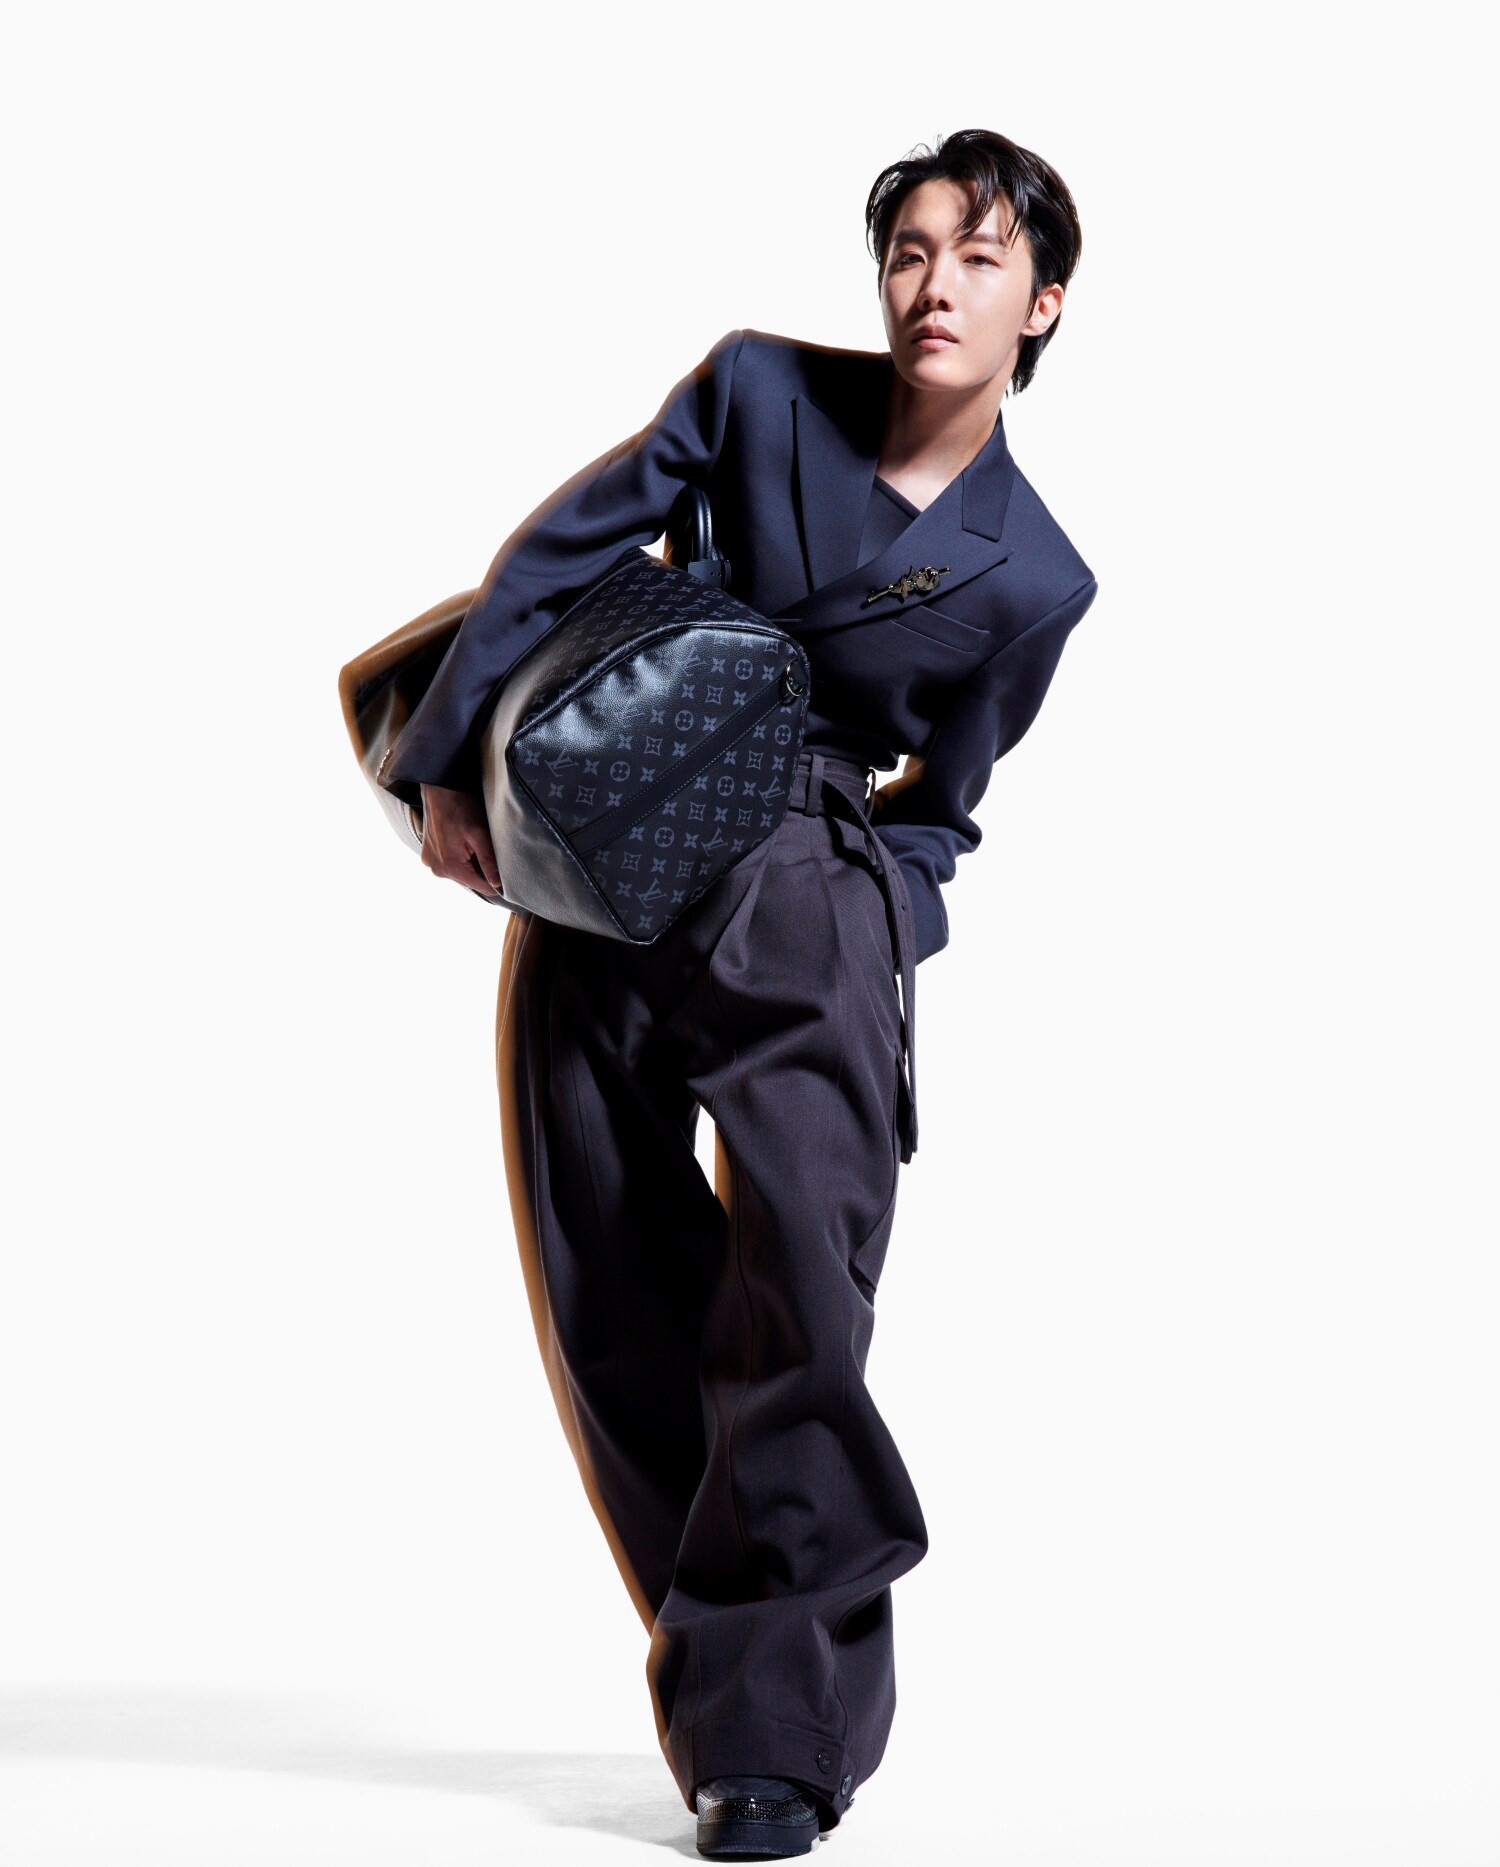 BTS's J-Hope Radiates Expensive Vibes At A Louis Vuitton Pop-Up